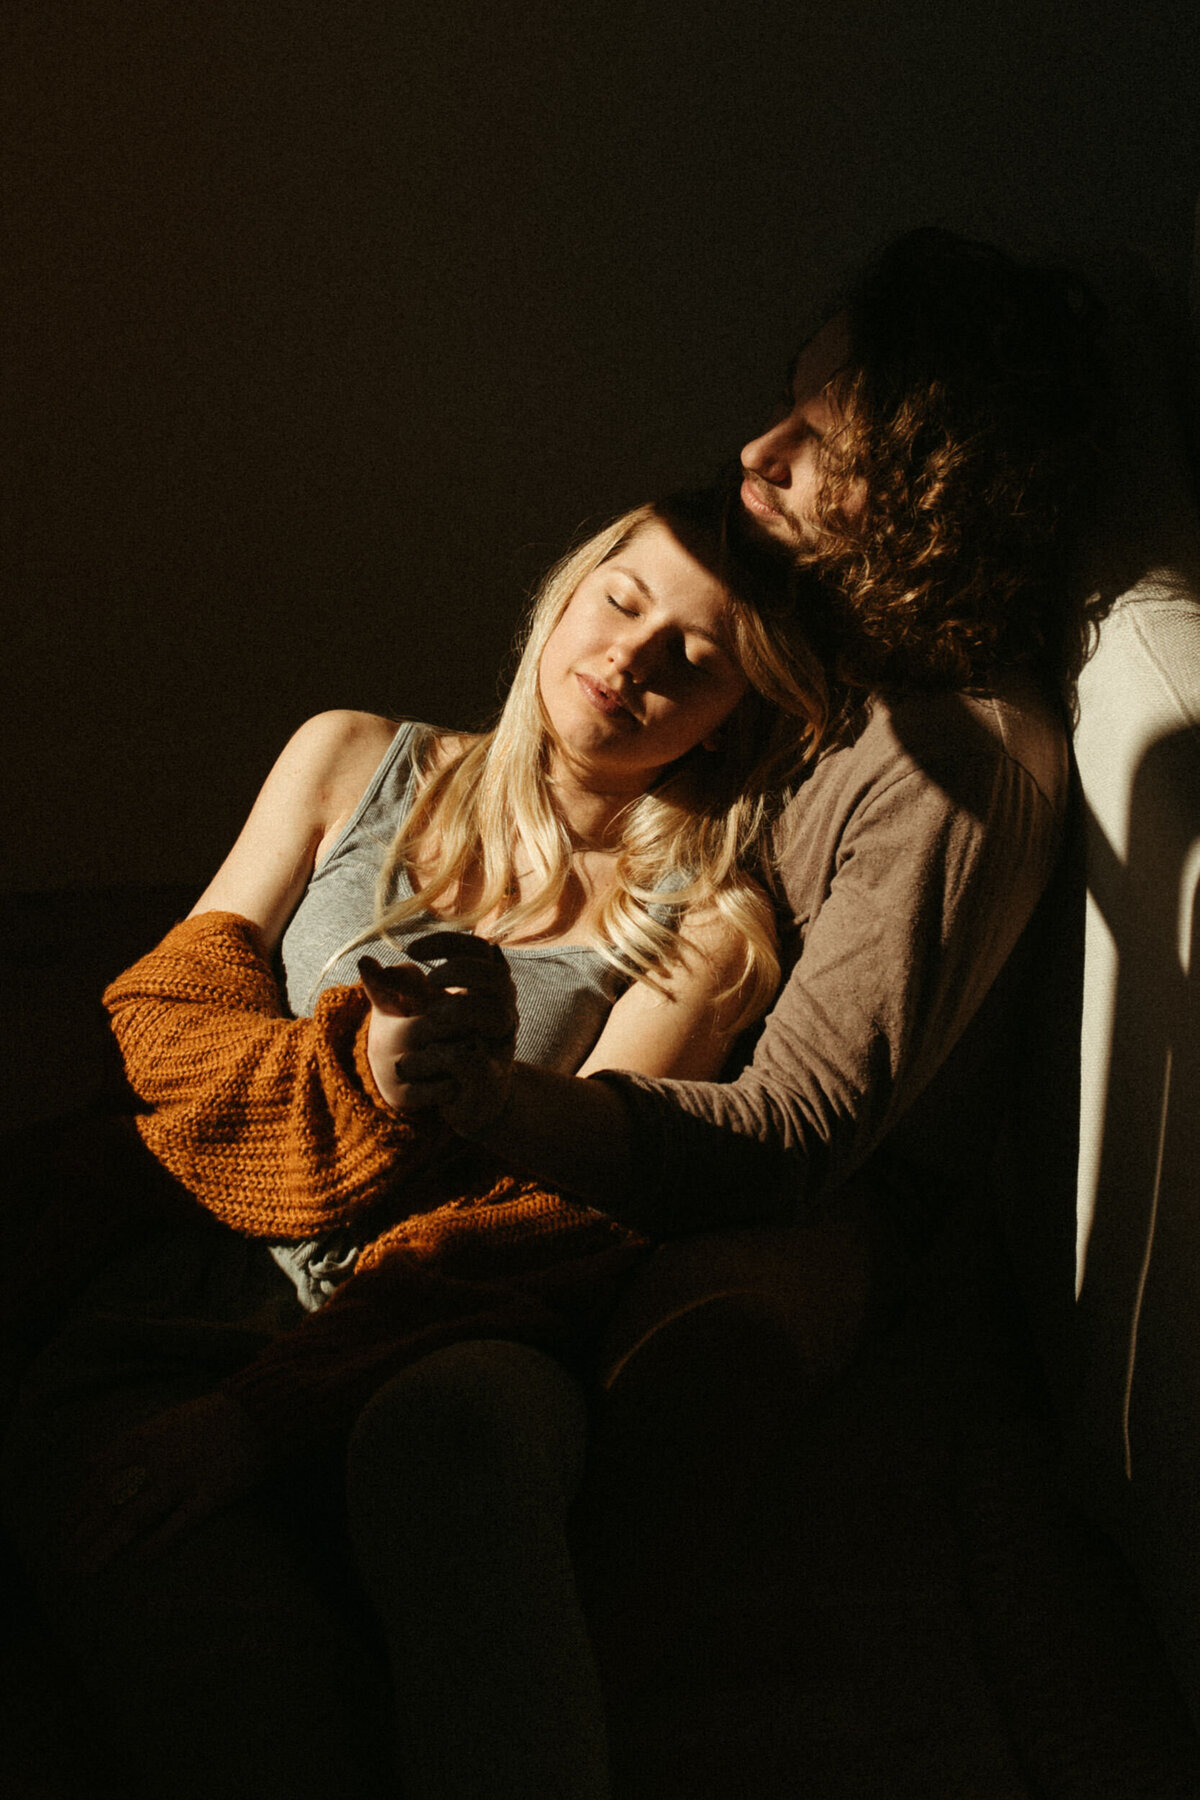 Girl leaning against guy next to a couch inside their home with dramatic lighting